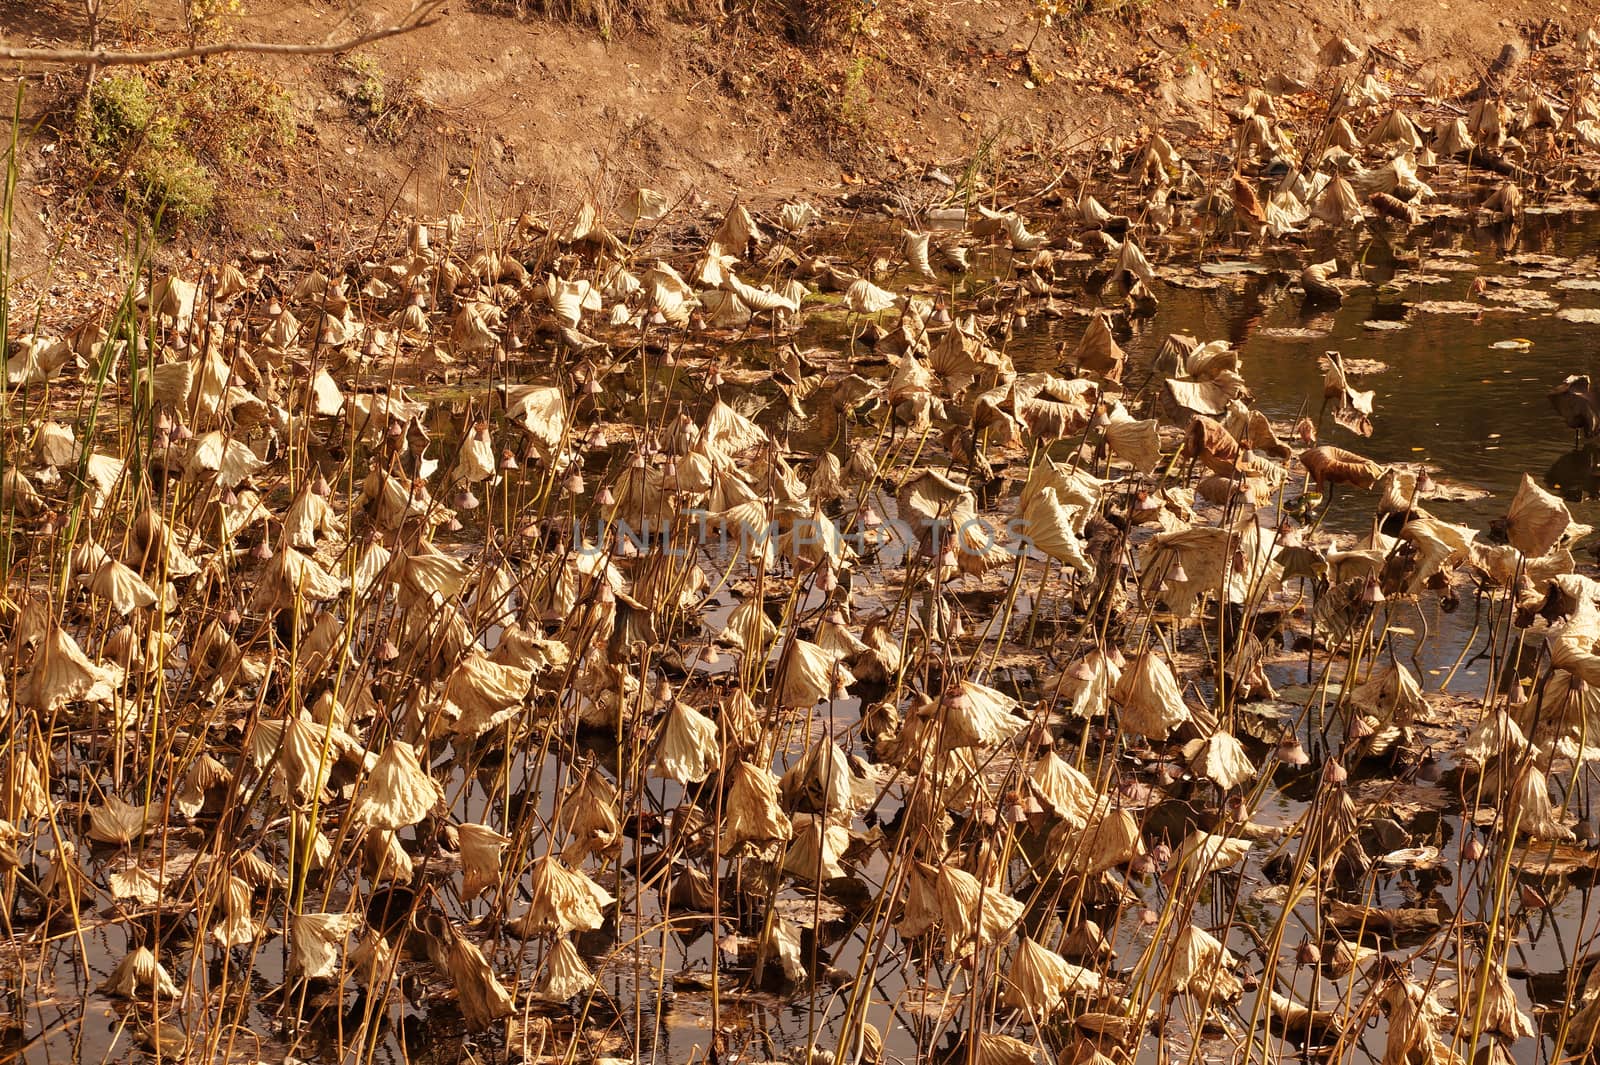 Dried-up lotuses faded in a small reservoir in the territory of the Volgograd region